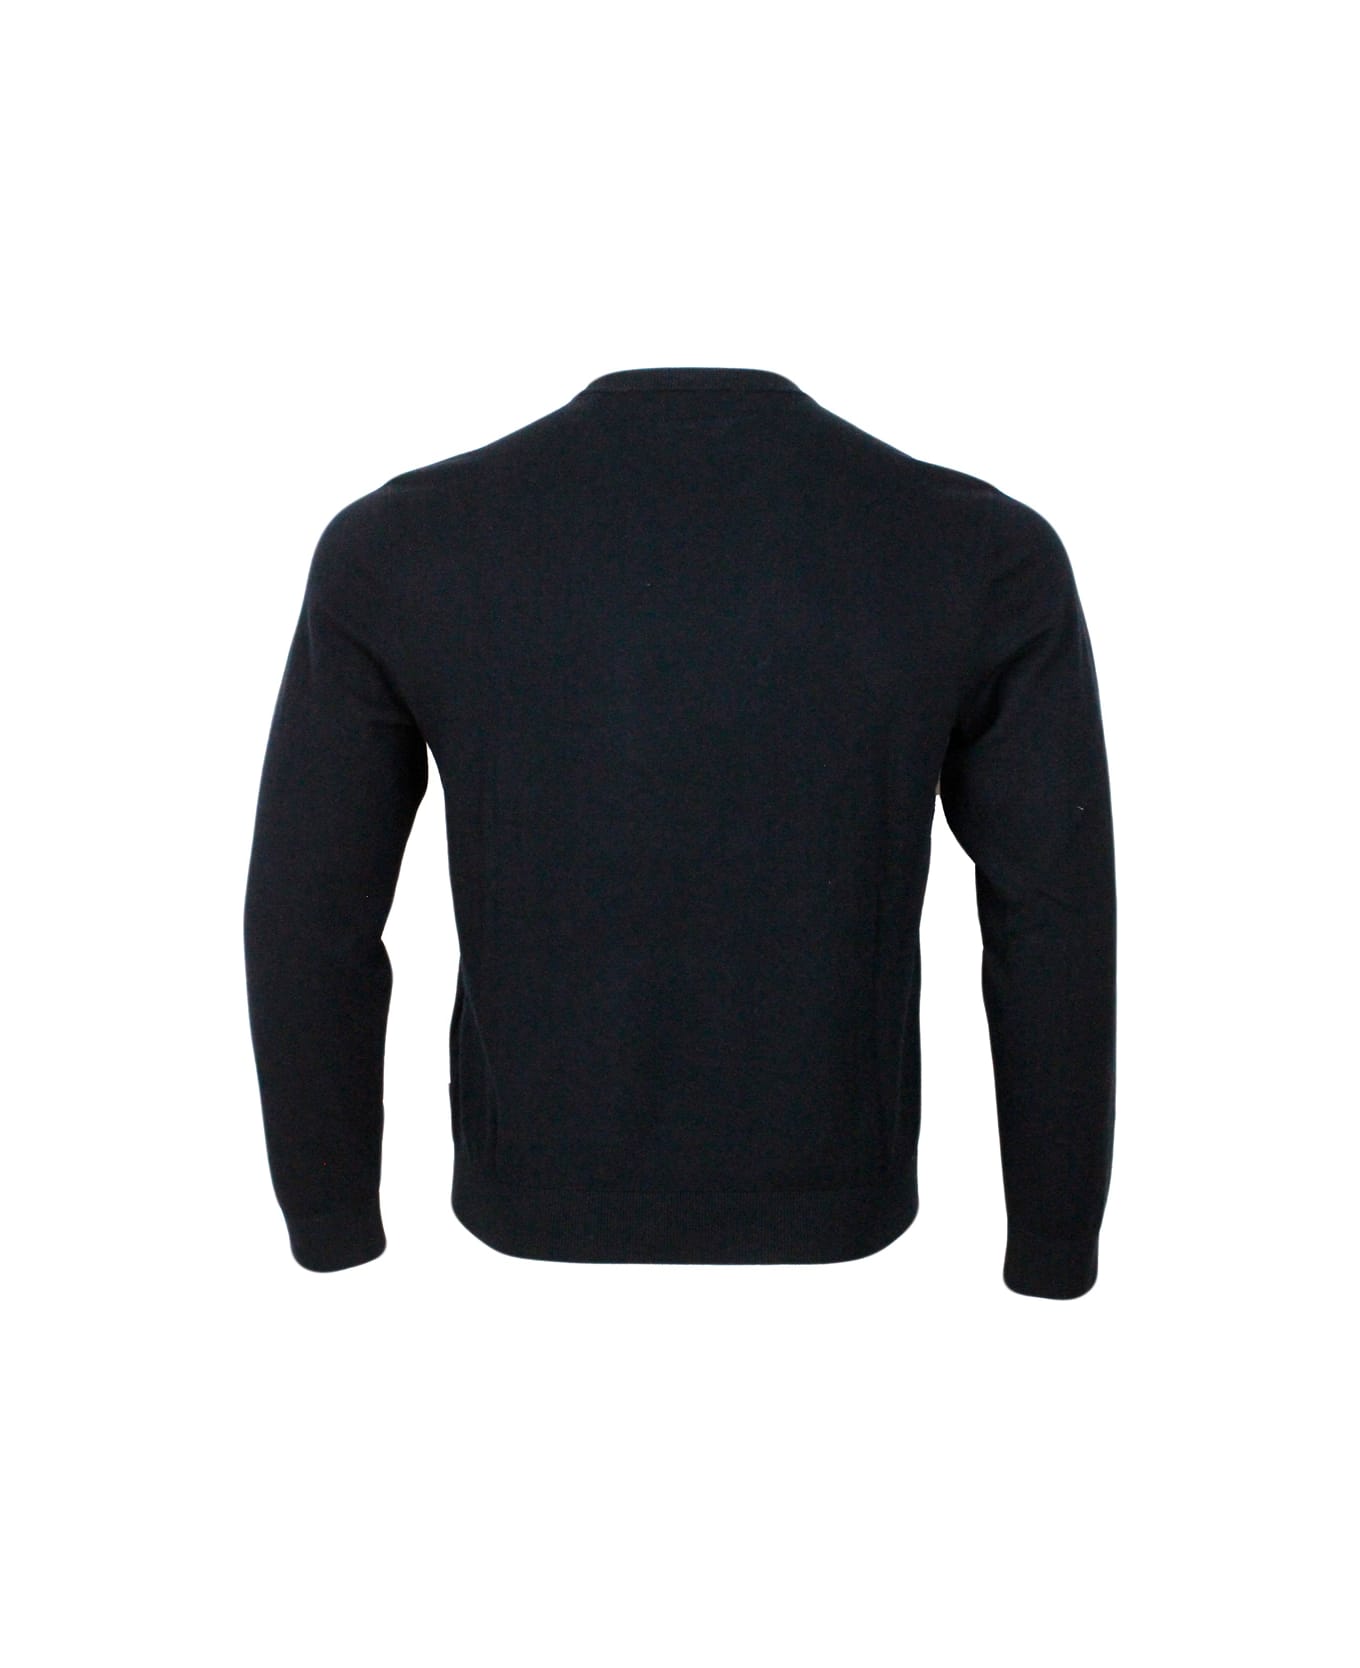 Armani Collezioni Lightweight Long-sleeved Crew-neck Sweater Made Of Warm Cotton And Cashmere With Contrasting Color Profiles At The Bottom And On The Cuffs - Black ニットウェア